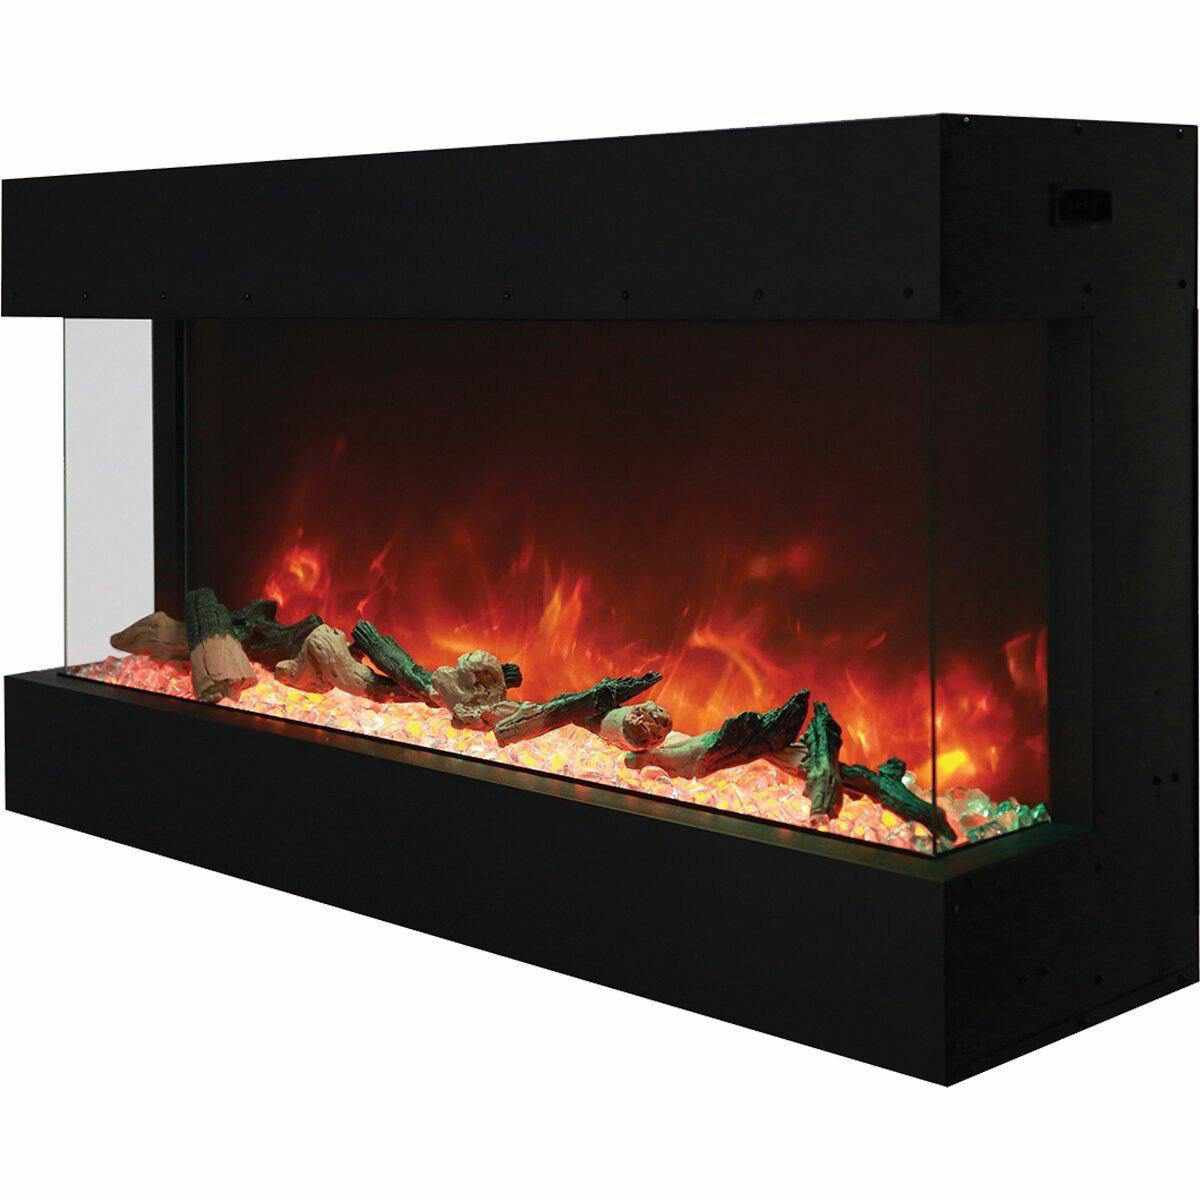 Amantii 40-TRU-VIEW-XL Electric Built-In Fireplace - 3 Sided 101.60 cm Wide - Outdoorium